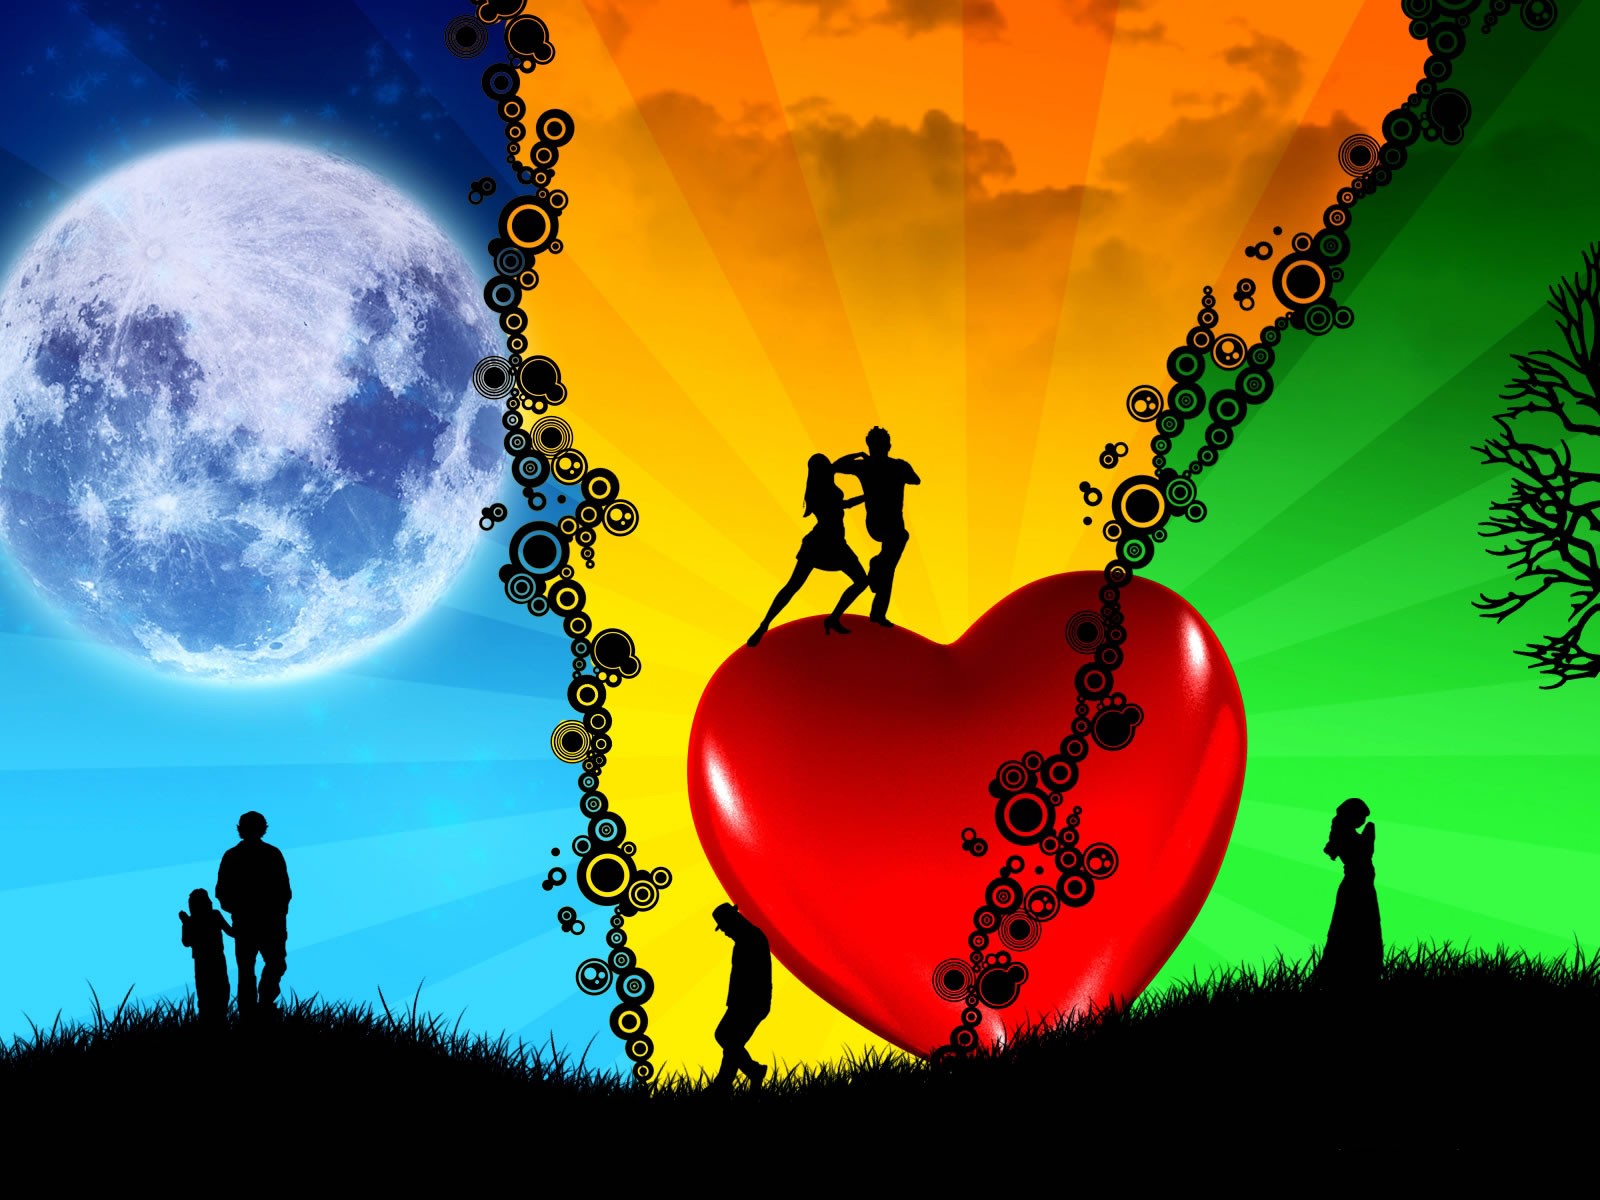 Free Download Wallpaper HD Awesome Wallpapers Of Love